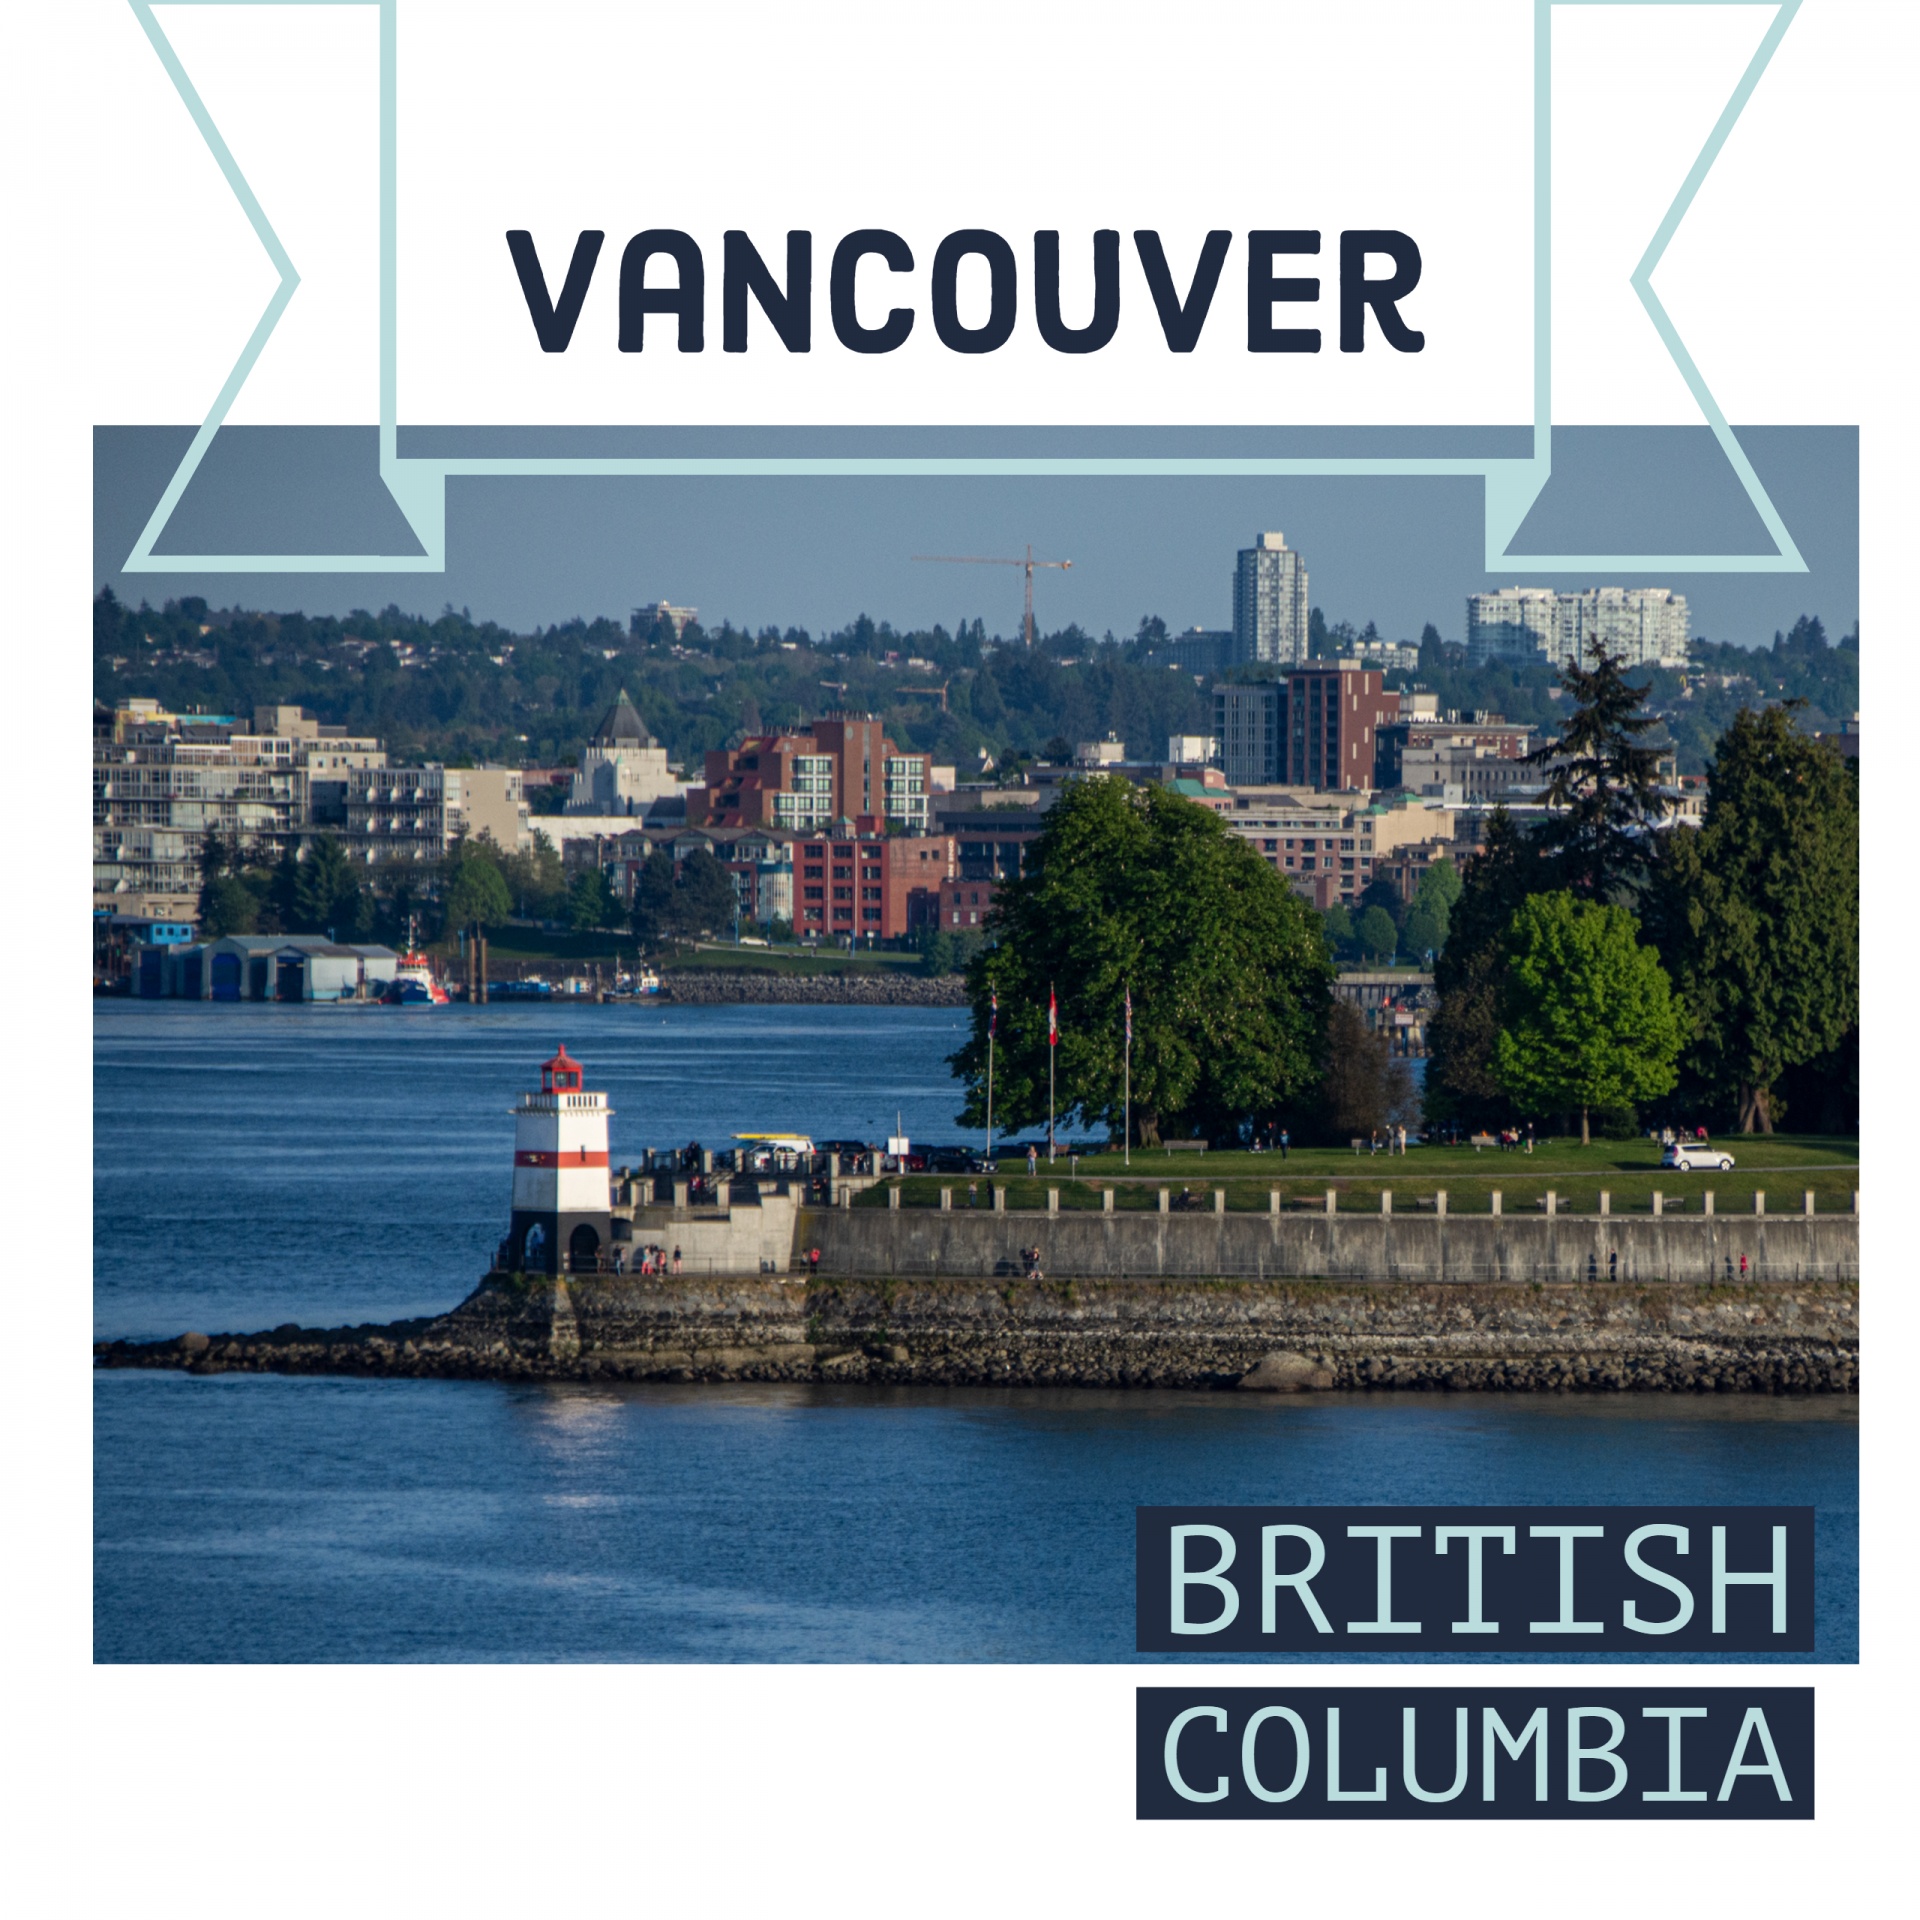 travel poster featuring Vancouver, British Columbia, Canada